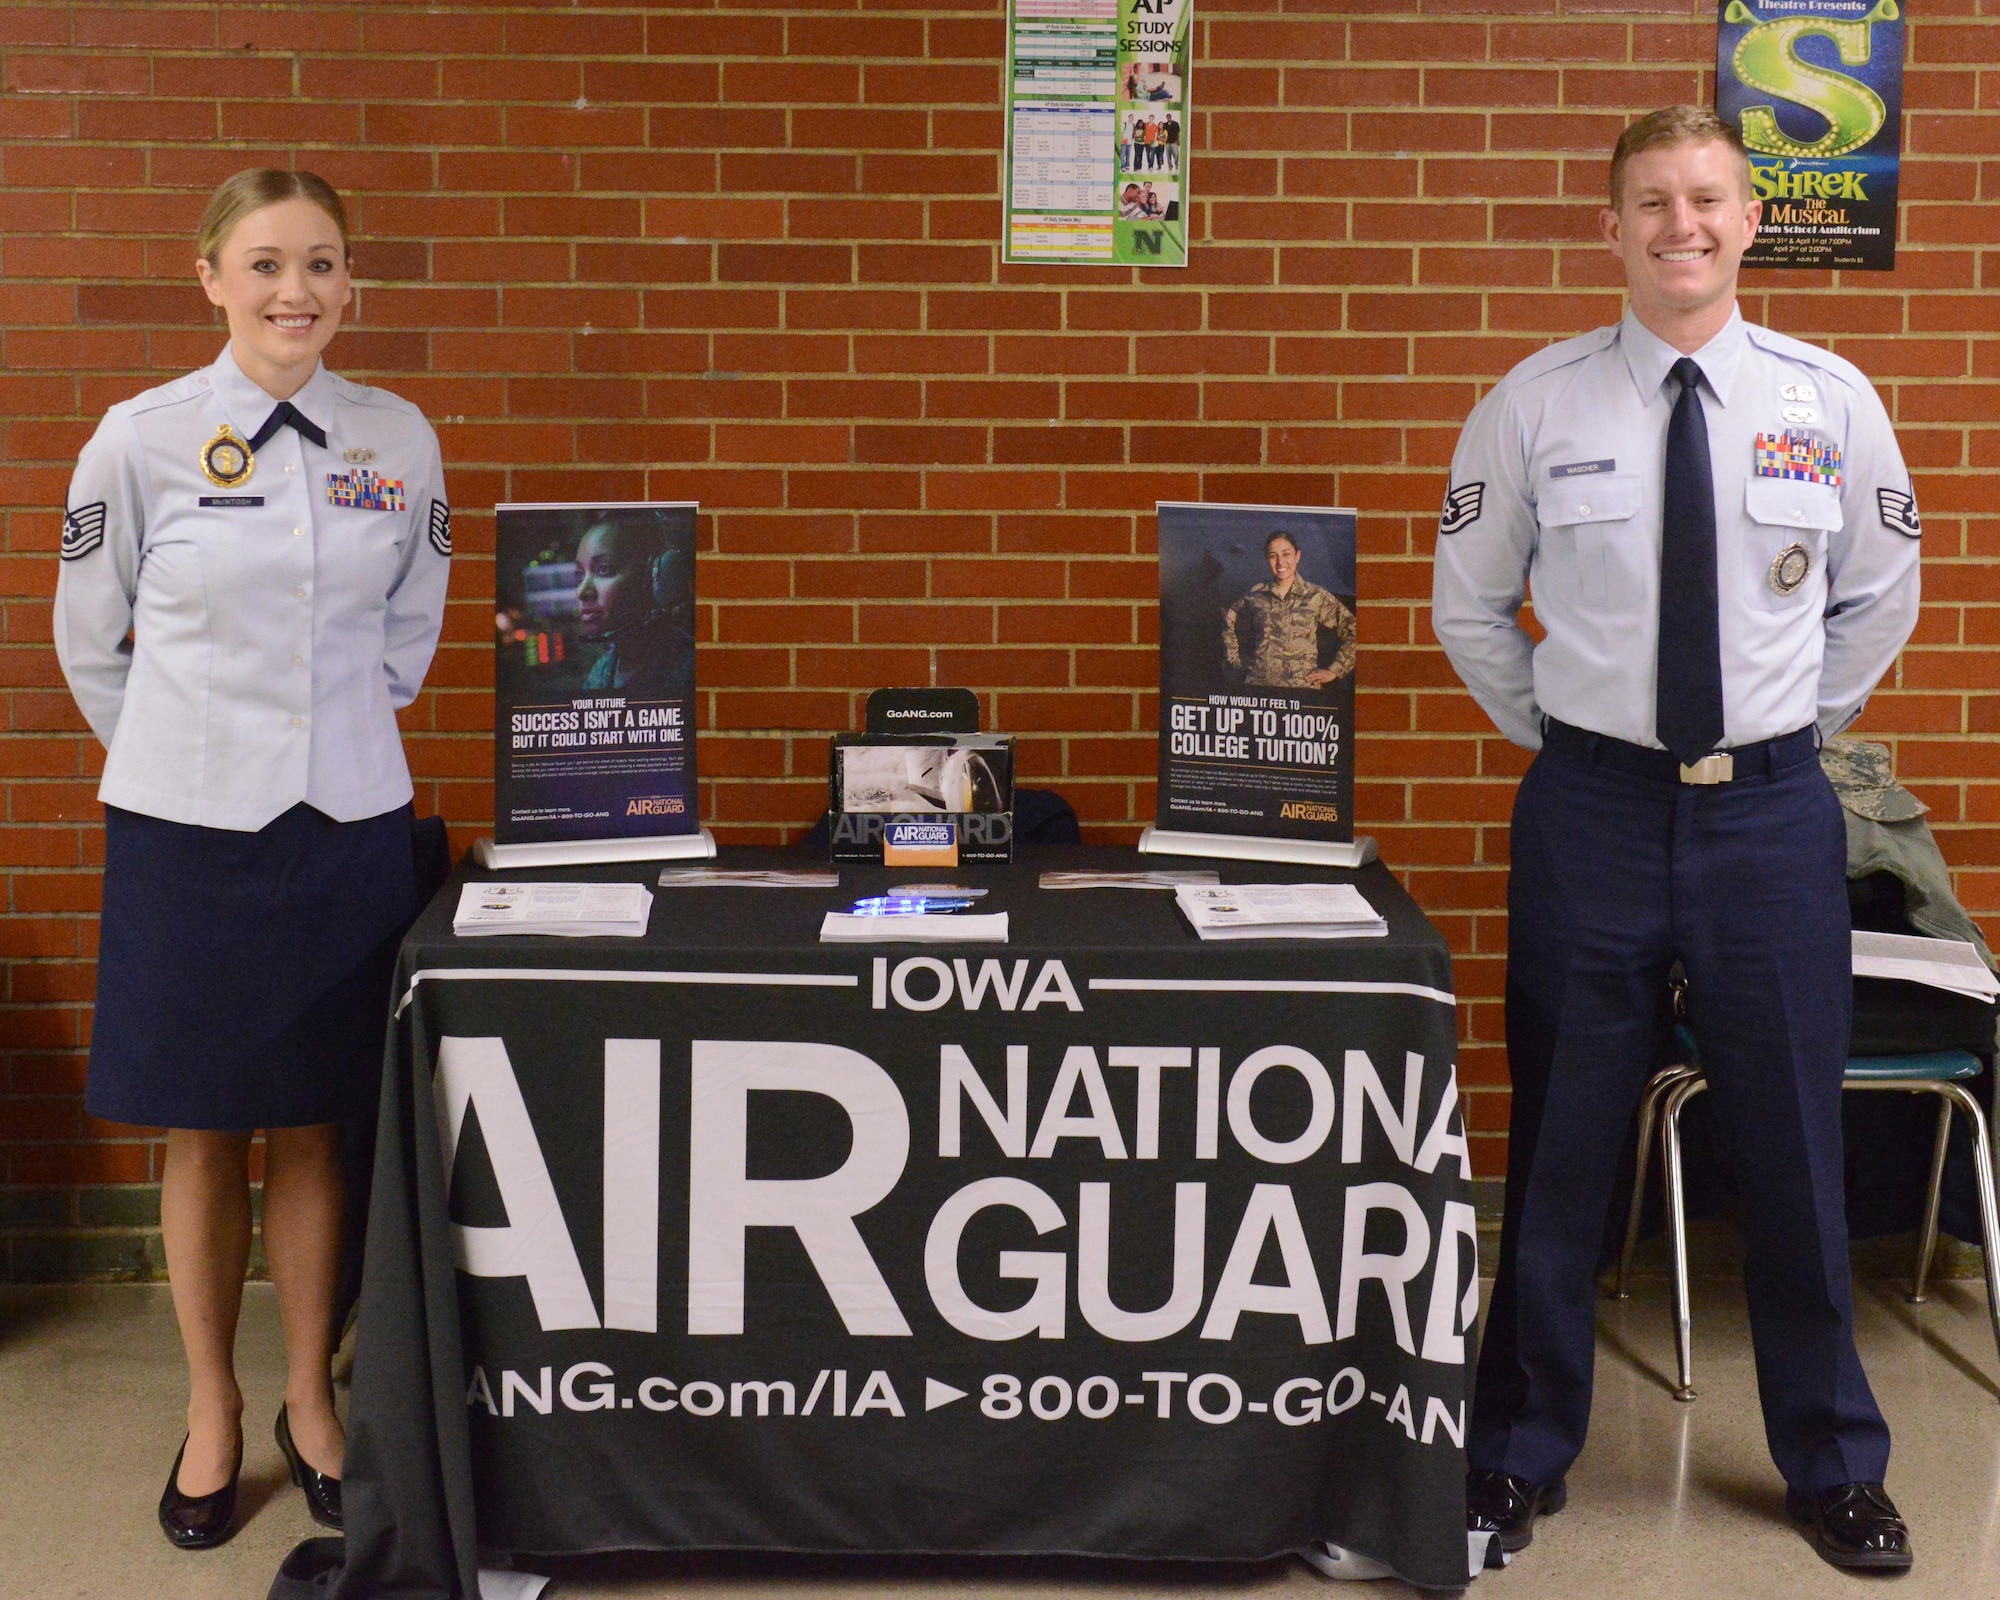 Tech. Sgt. Sabrina Mcintosh and Staff Sgt. Austin Wascher, pose for a photo at the 132nd Wing’s recruitment table at the JROTC competition at North High School, Des Moines, Iowa on April 1, 2017. This was the first time that an Air Force recruiting team had attended the competition. (U.S. Air National Guard photo by Airman Katelyn Sprott)